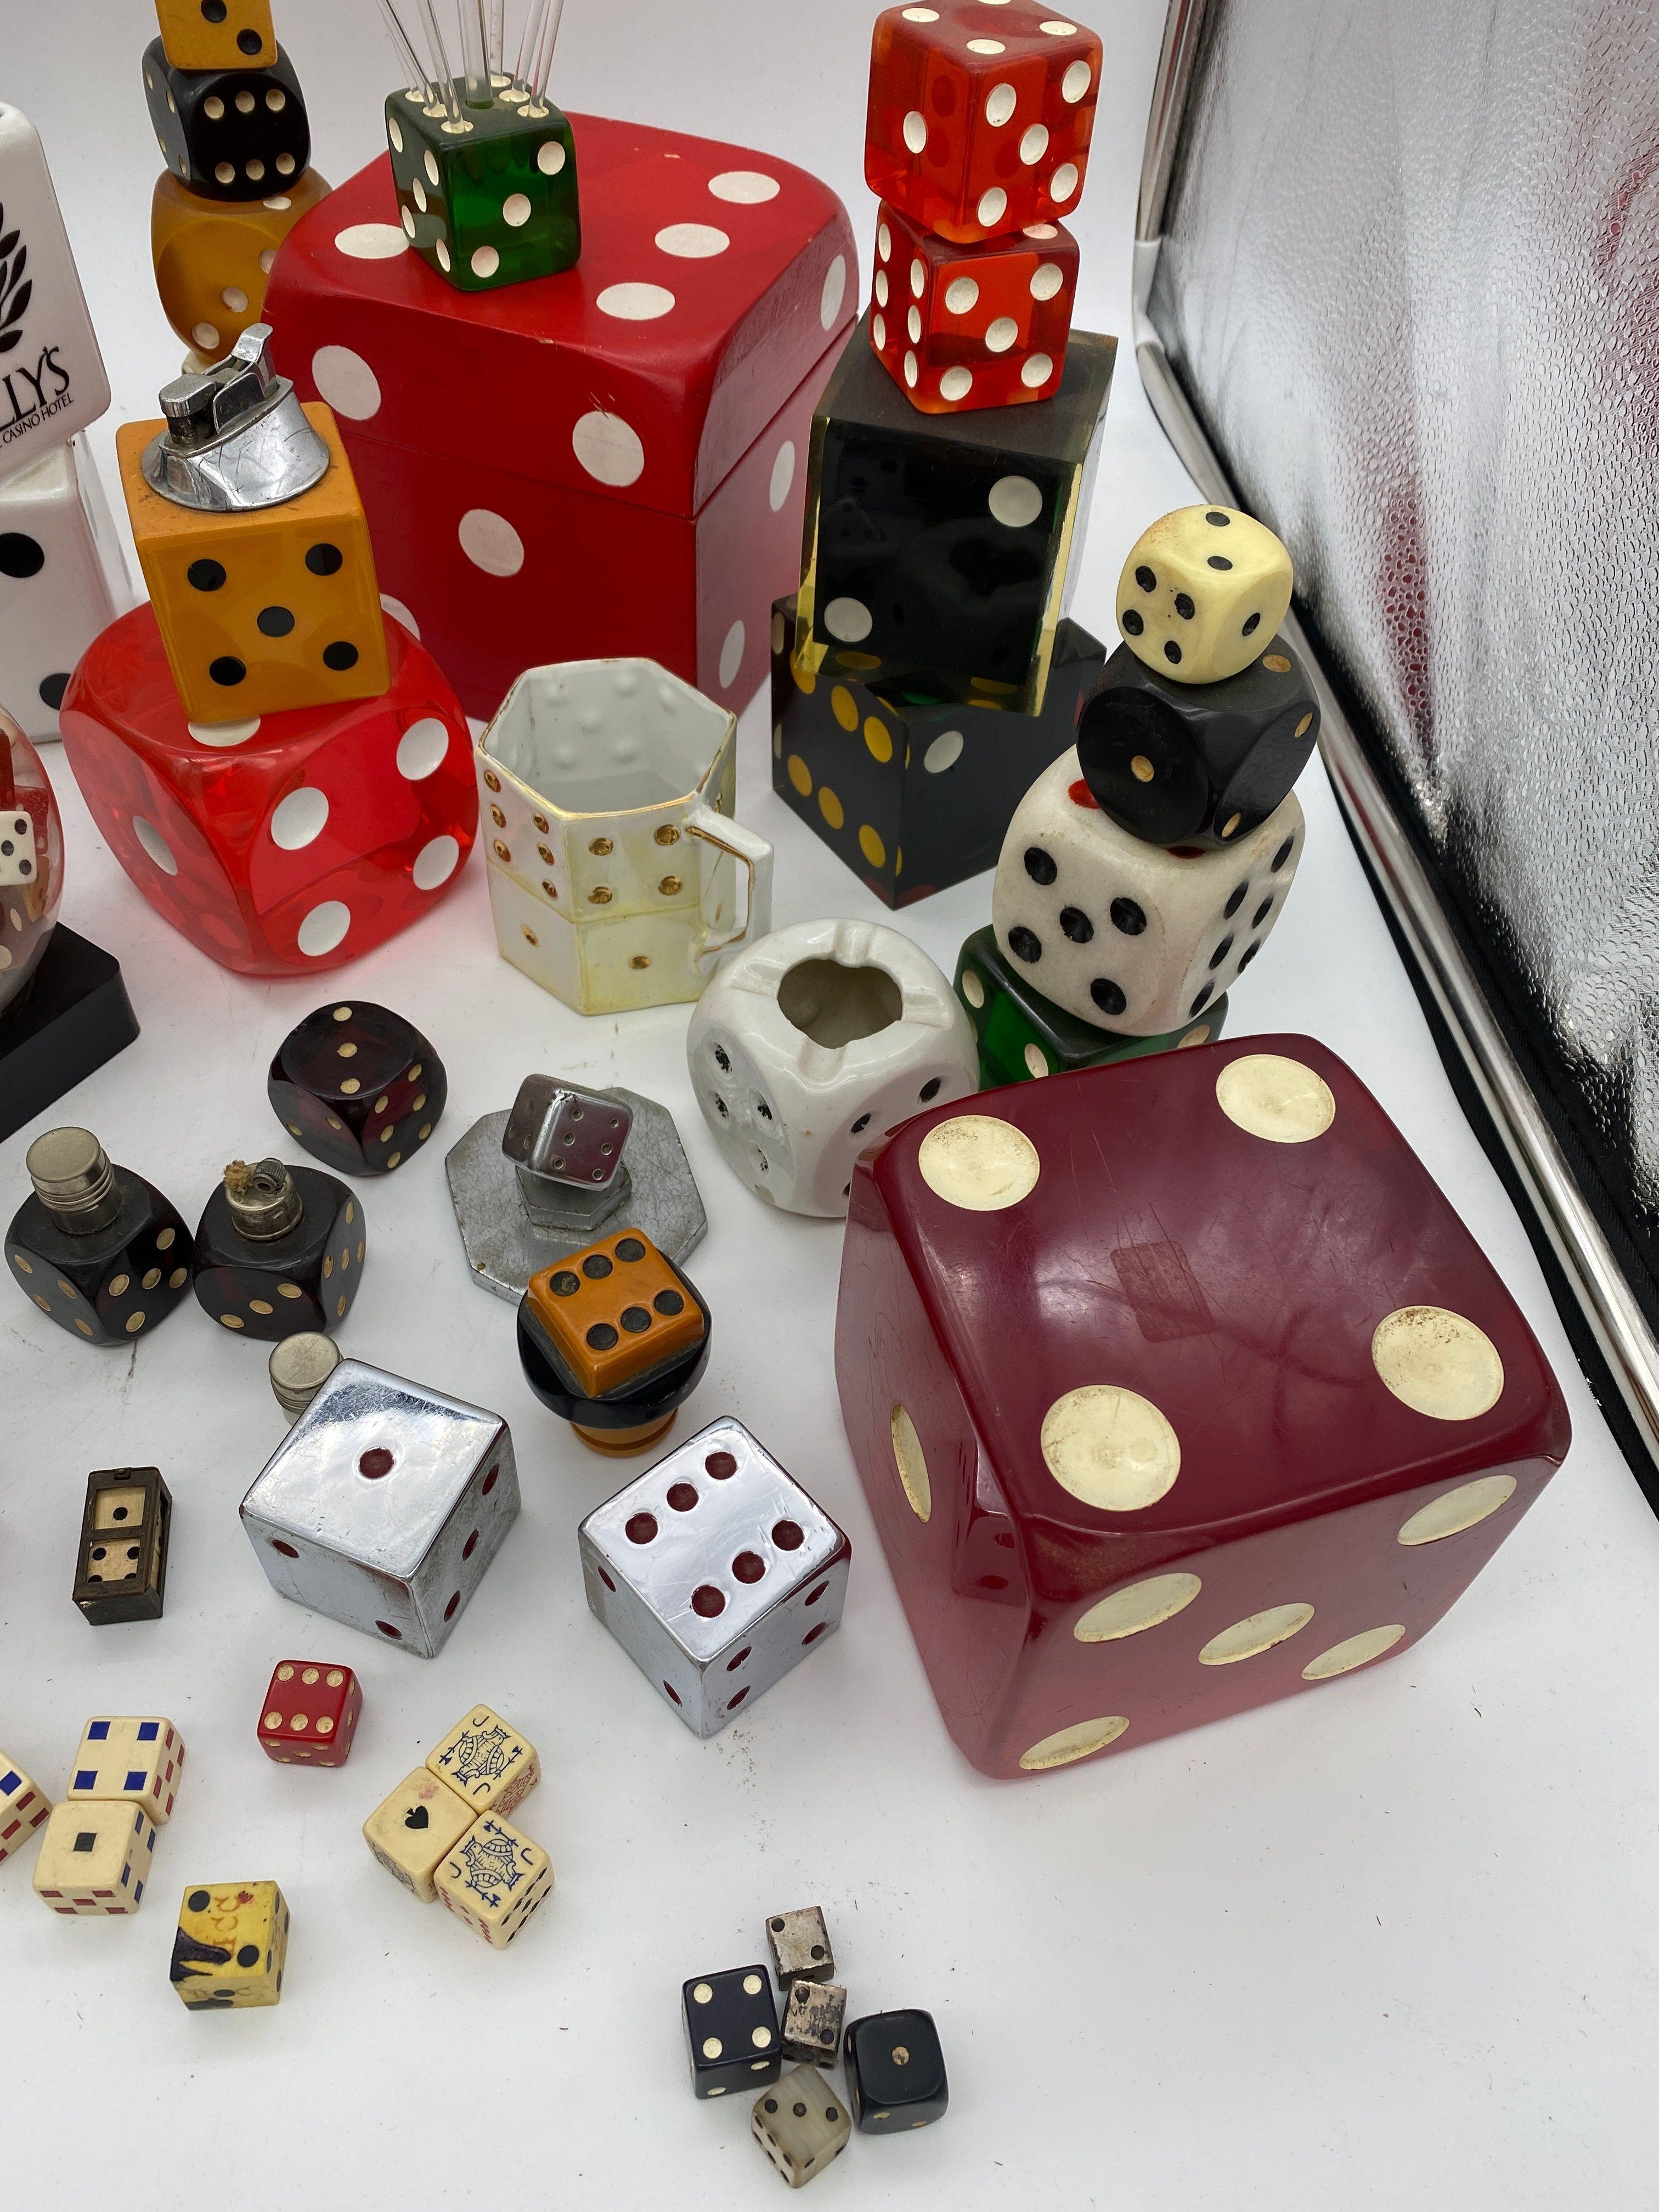 From the personal collection of Harvey Schwartz owner of this store Harvey's on Beverly is a large collection of dice including music boxes, clocks, lighters, swizzle sticks, ashtrays, display pieces, large dice, small dice. all made with variety of